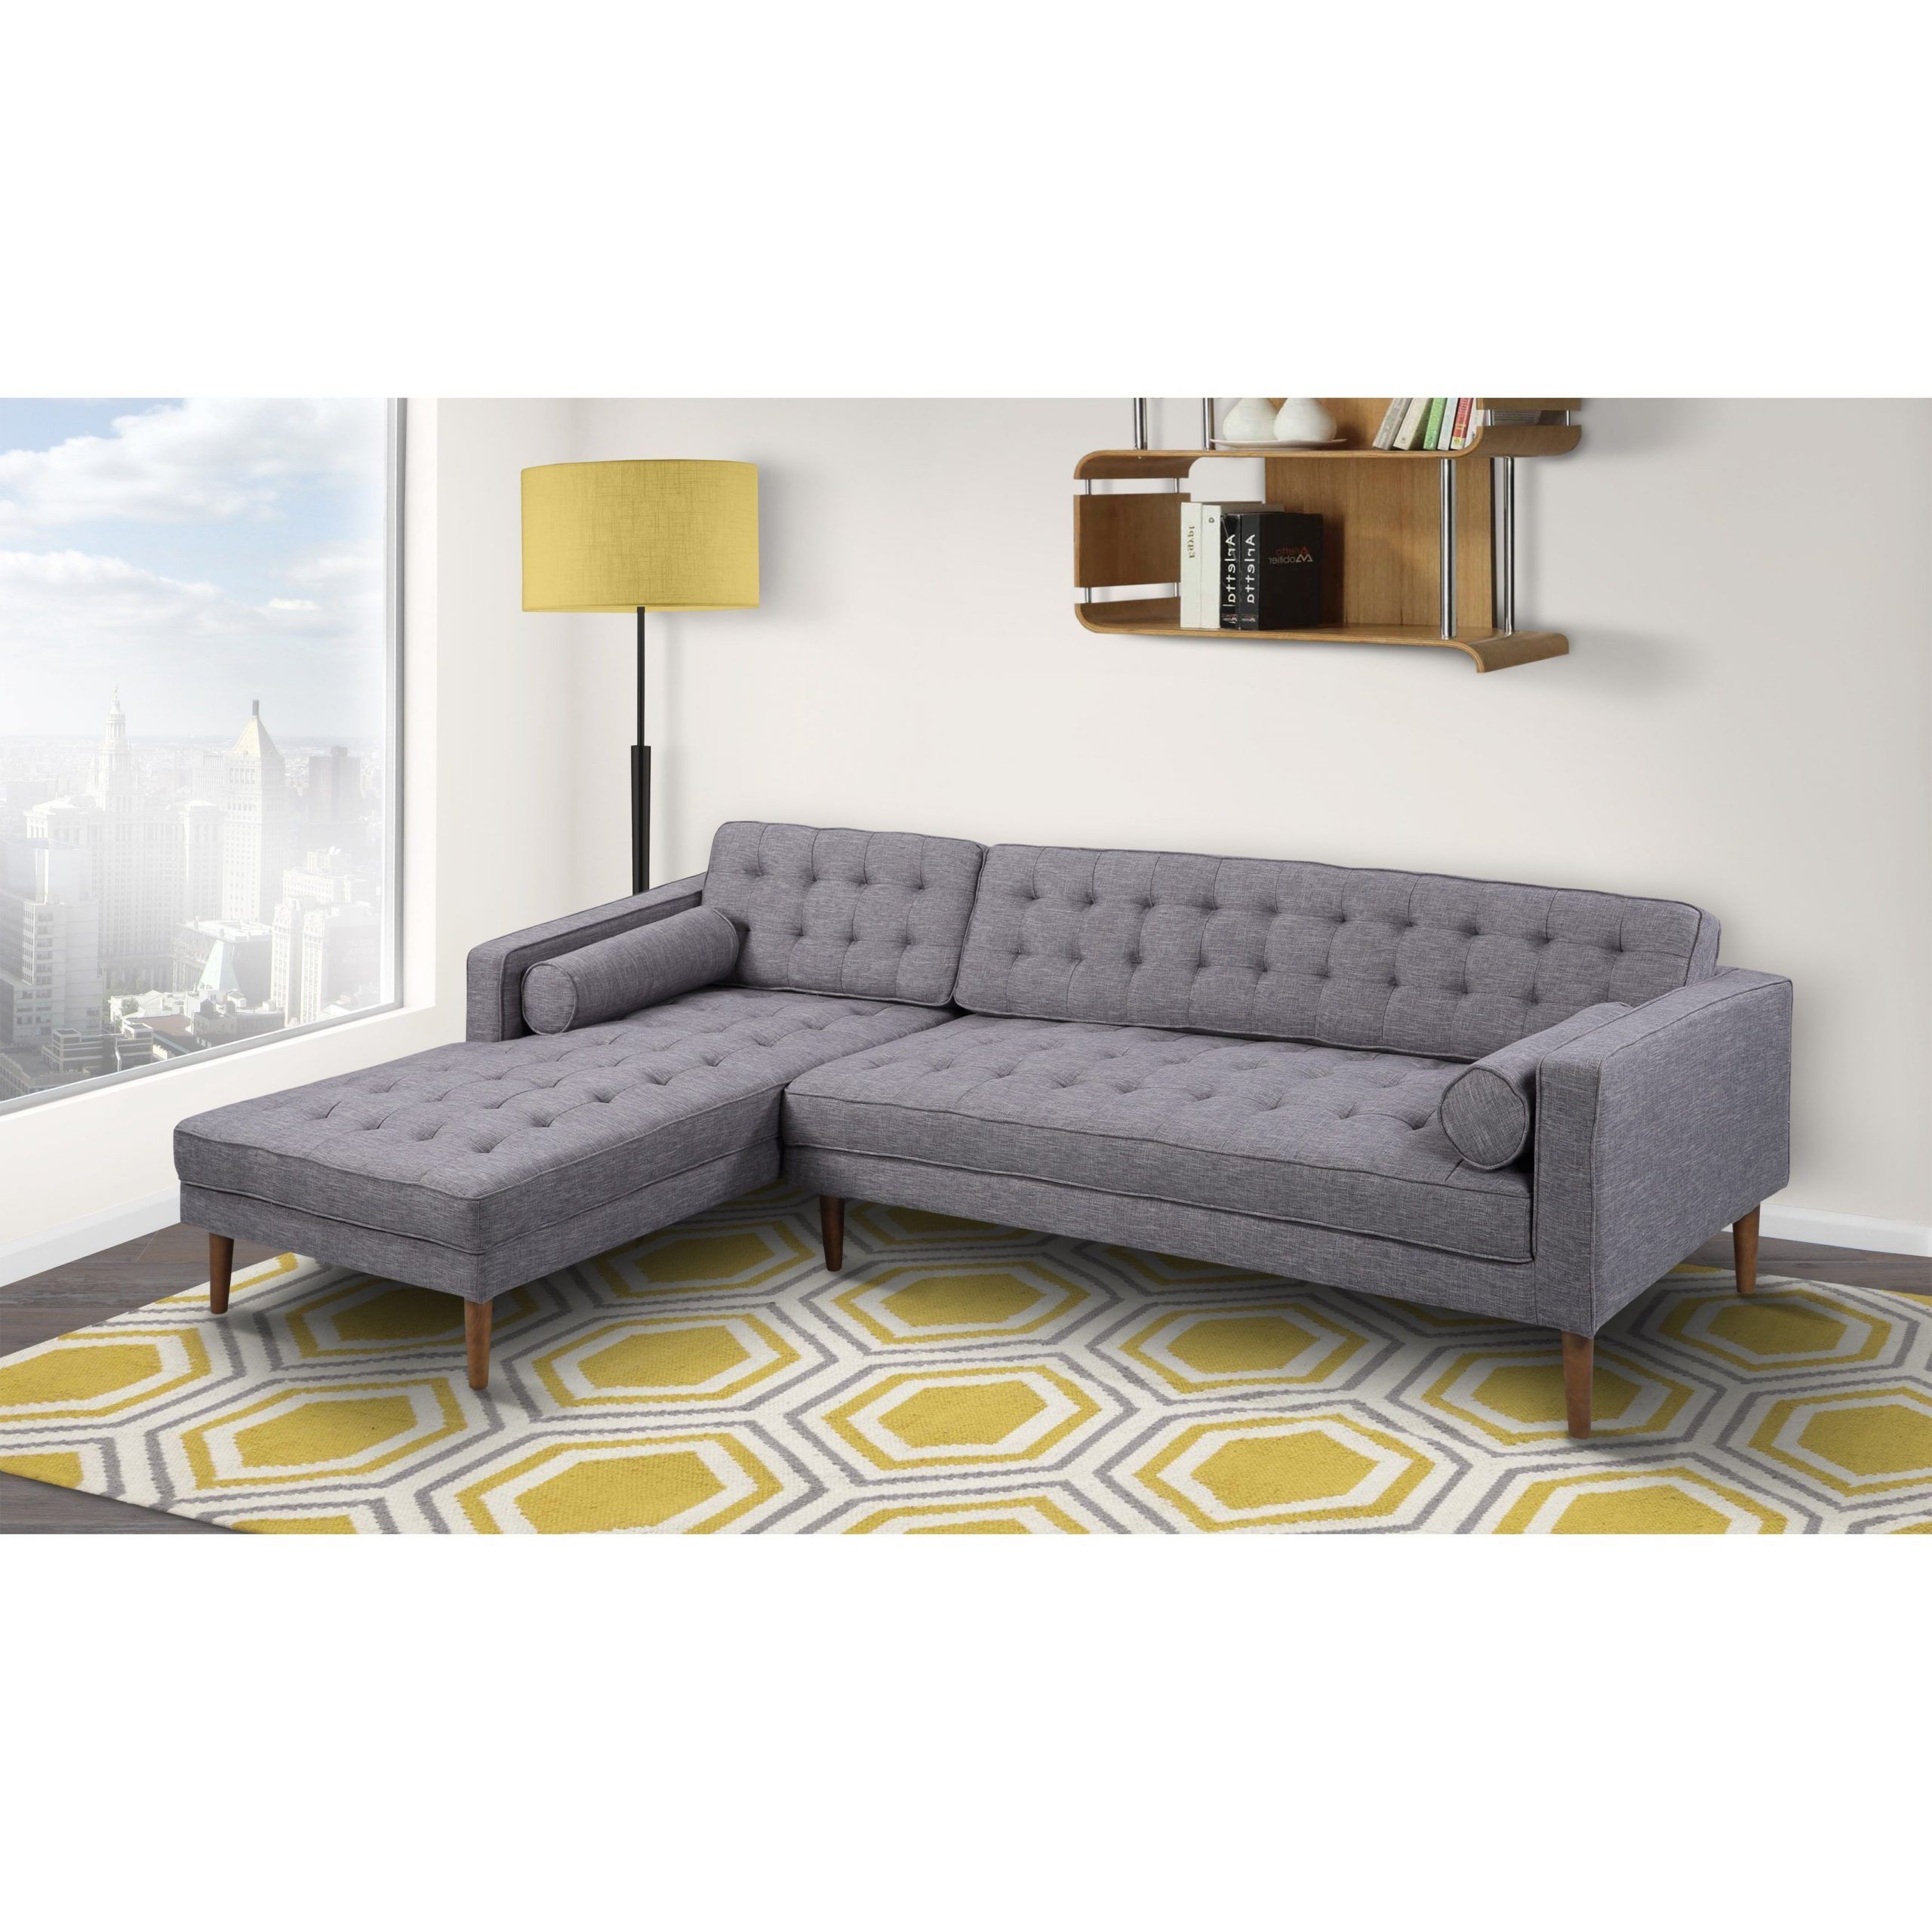 Armen Living Element Tufted Dark Grey Linen Sectional Sofa Throughout Most Up To Date Element Left Side Chaise Sectional Sofas In Dark Gray Linen And Walnut Legs (View 4 of 25)